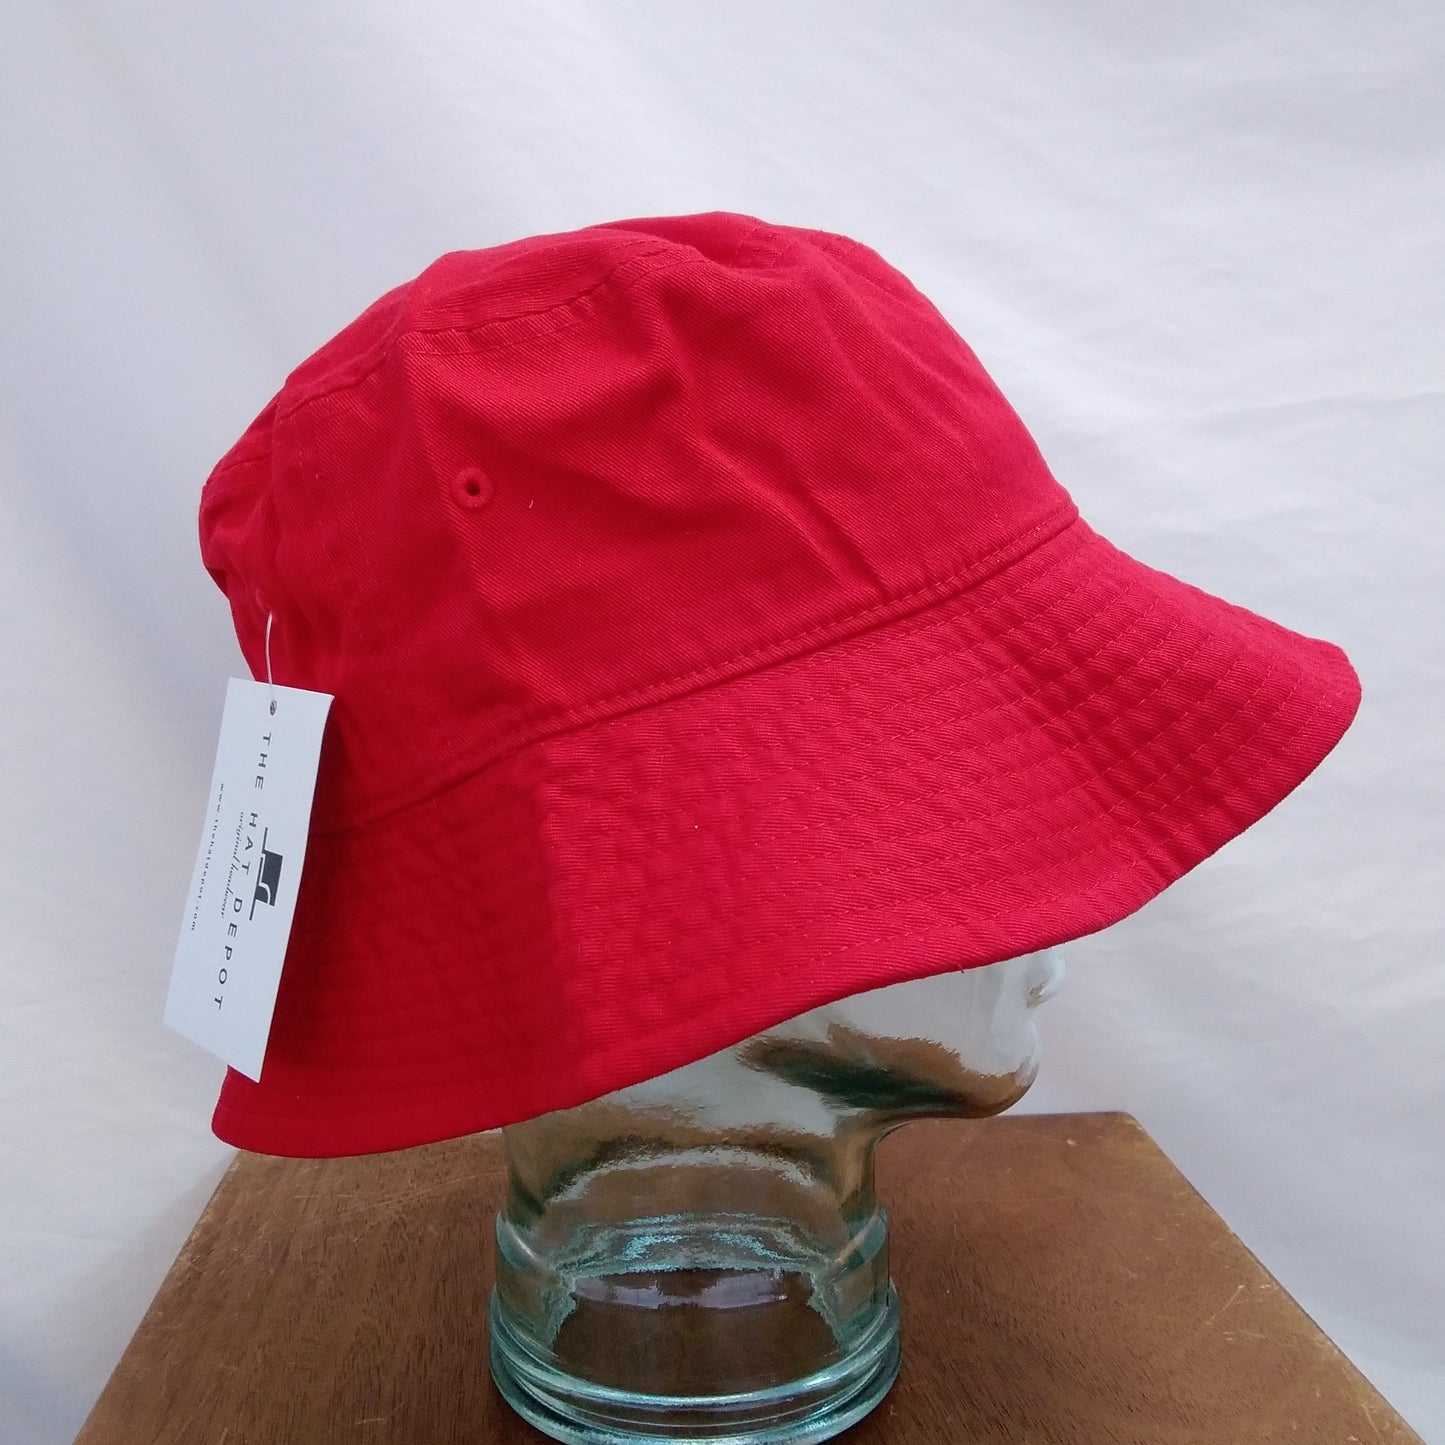 NWT - The Hat Depot Newhattan Long Brim 100% Cotton Red Fashion Bucket Hat - Size: S/M